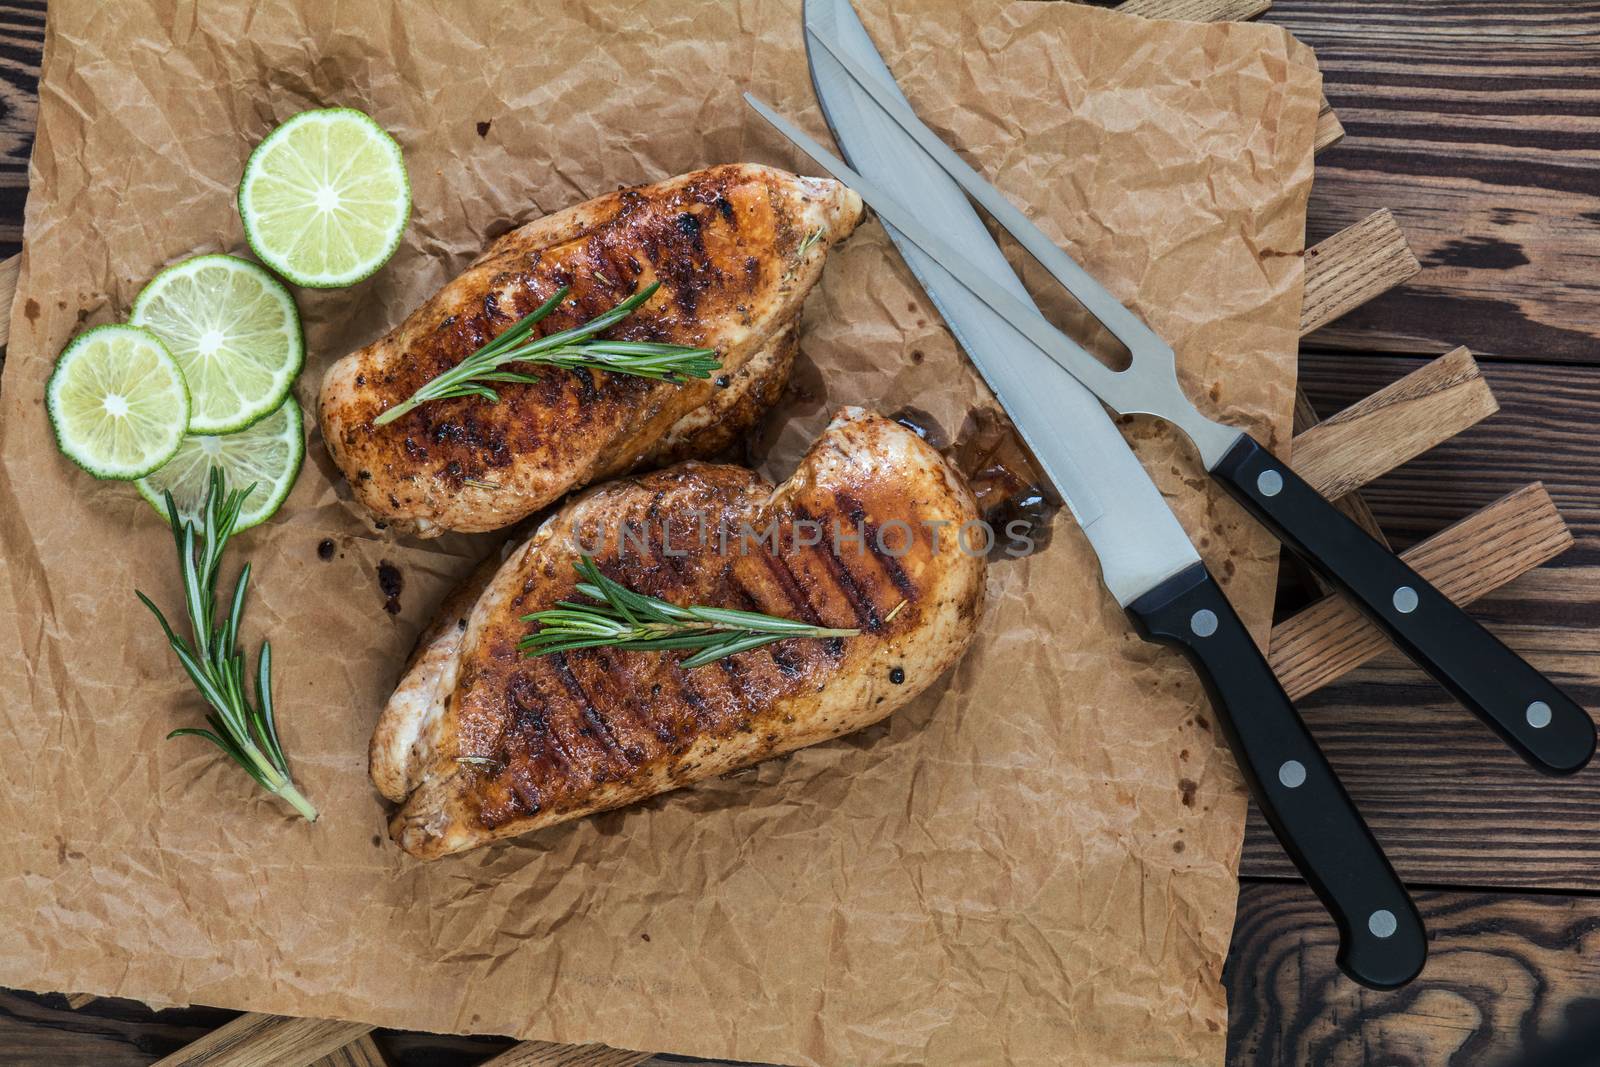 Grilled chicken filet with herbs  on a paper on wooden background. Rosemary and sliced lime on a dark groundwork.